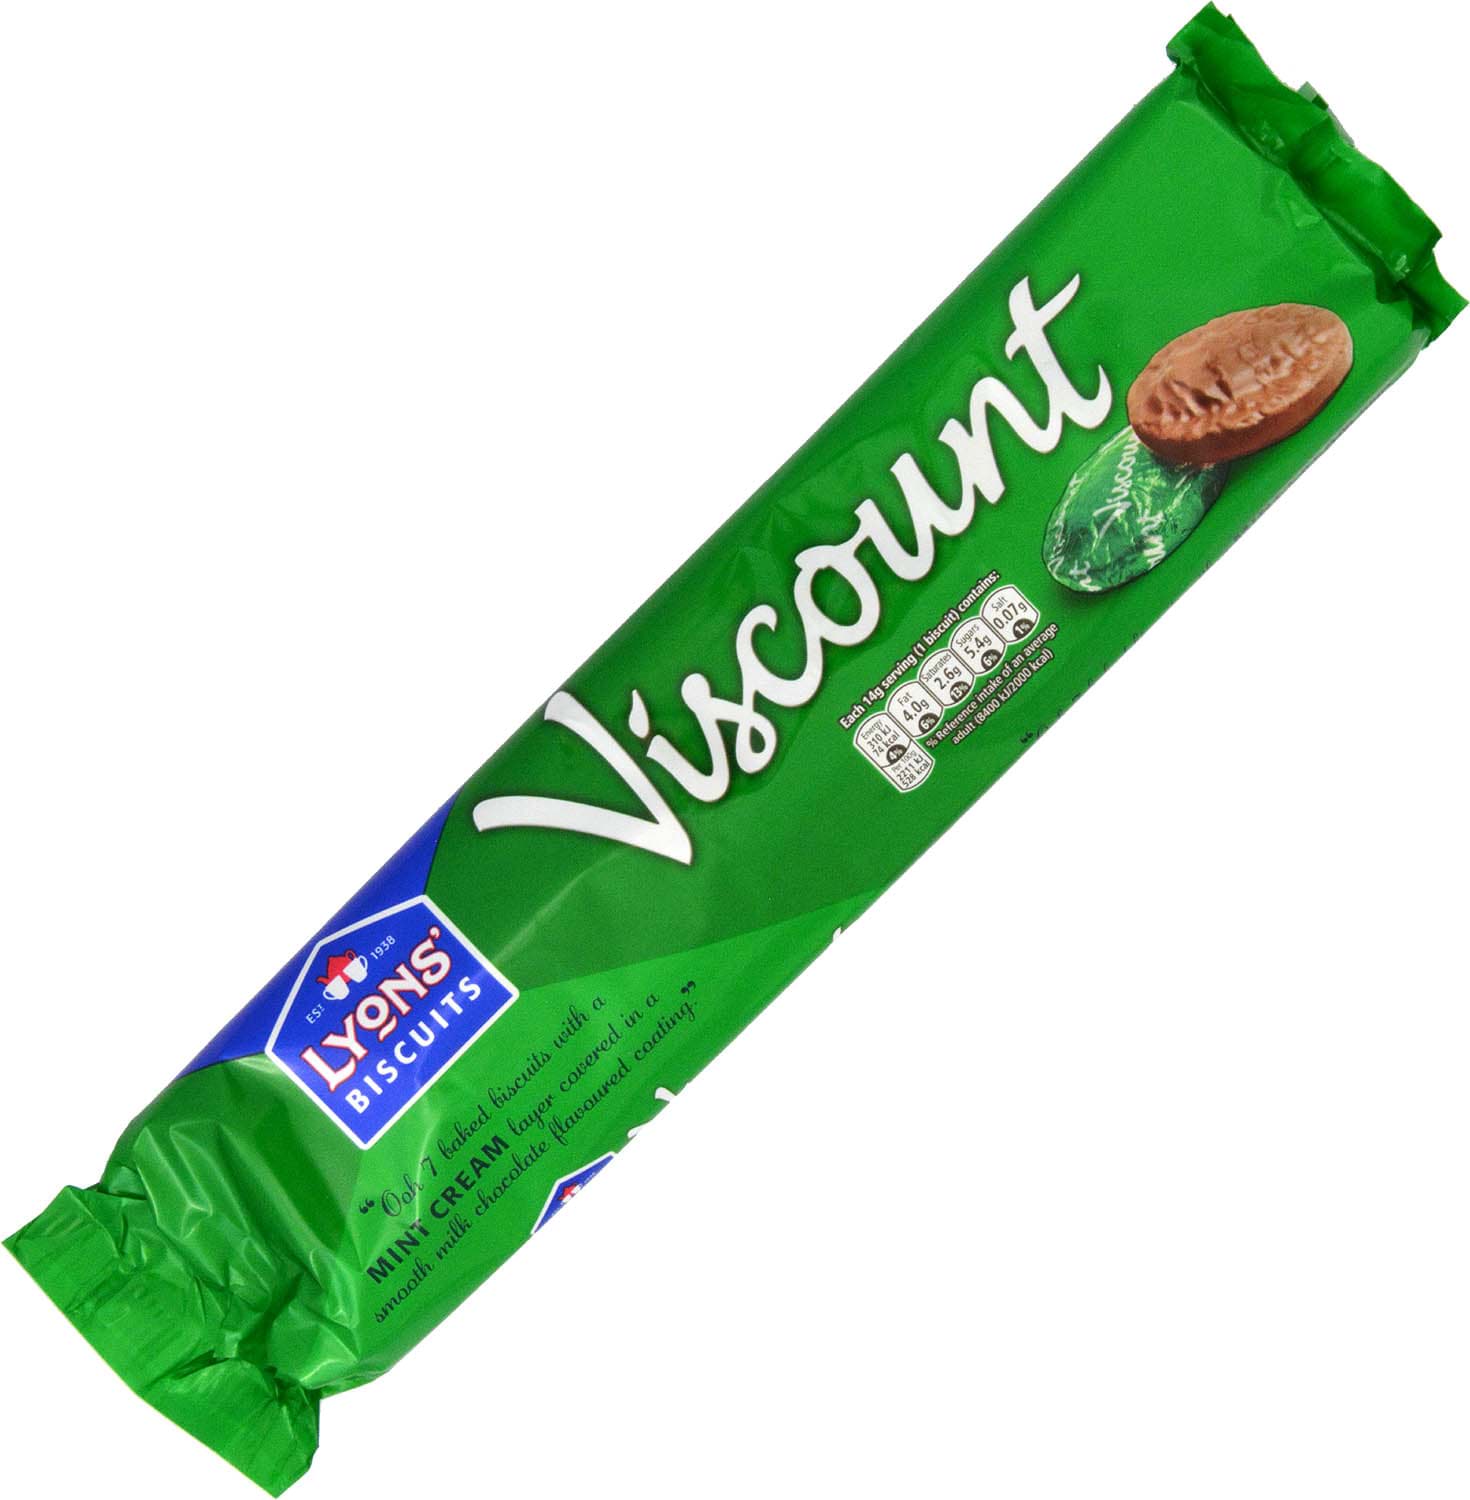 Picture of Lyons Viscount Original Mint Cream Biscuits 98g